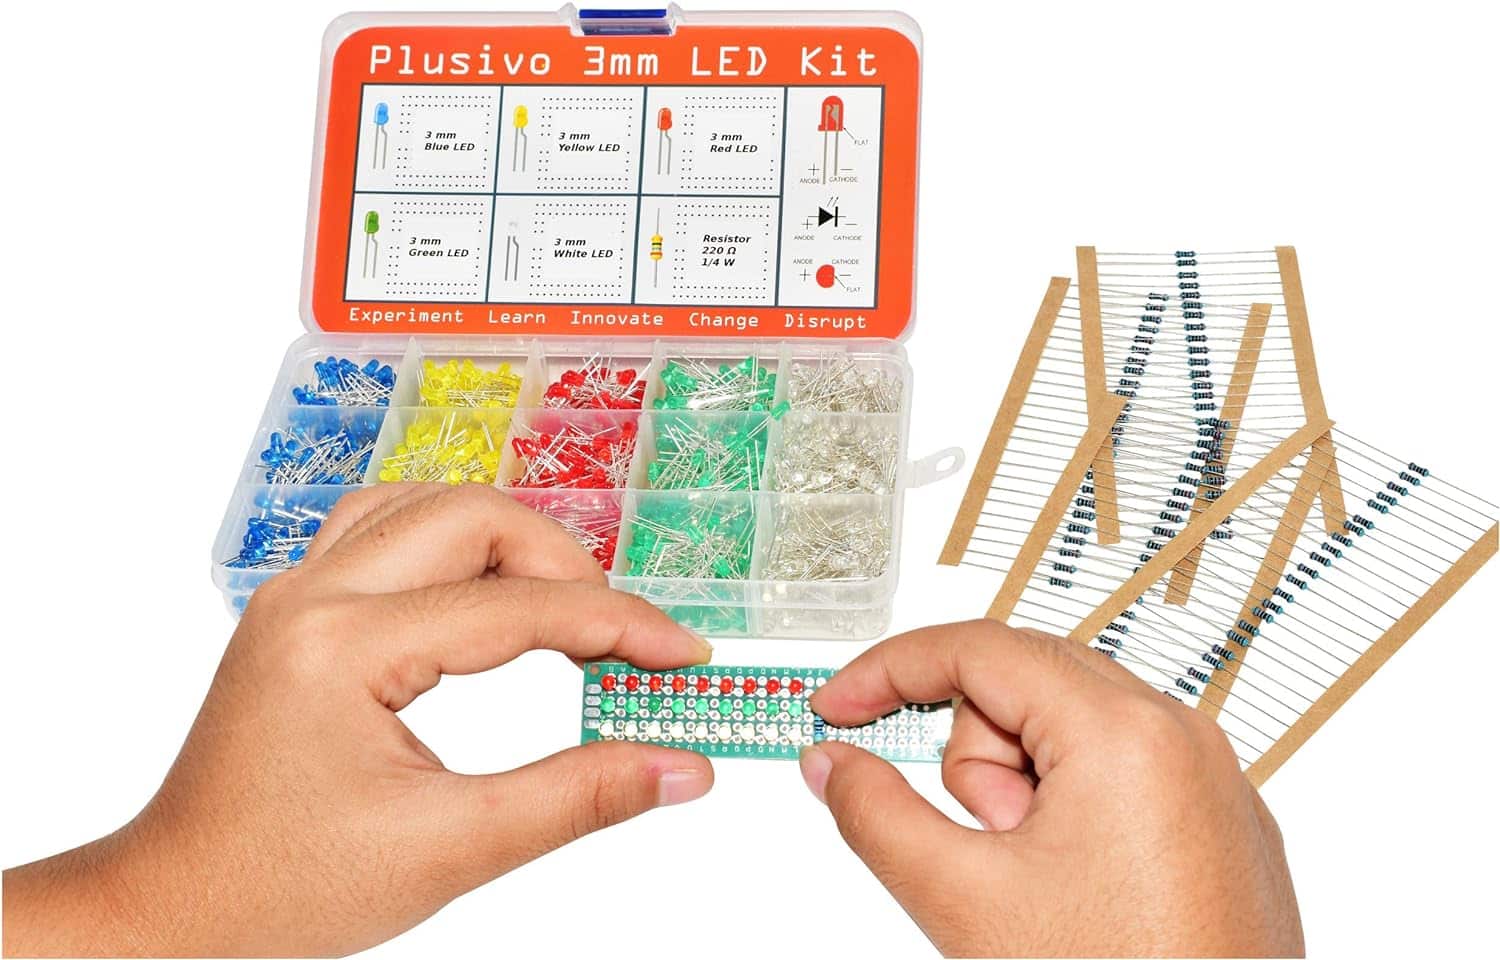 3mm Diffused LED Diode Assortment Kit - Pack of Assorted Color LEDs and Resistors (1000 pcs) - Red, Green, Yellow, Blue and White Light Emiting Diode Indicator Lights from Plusivo